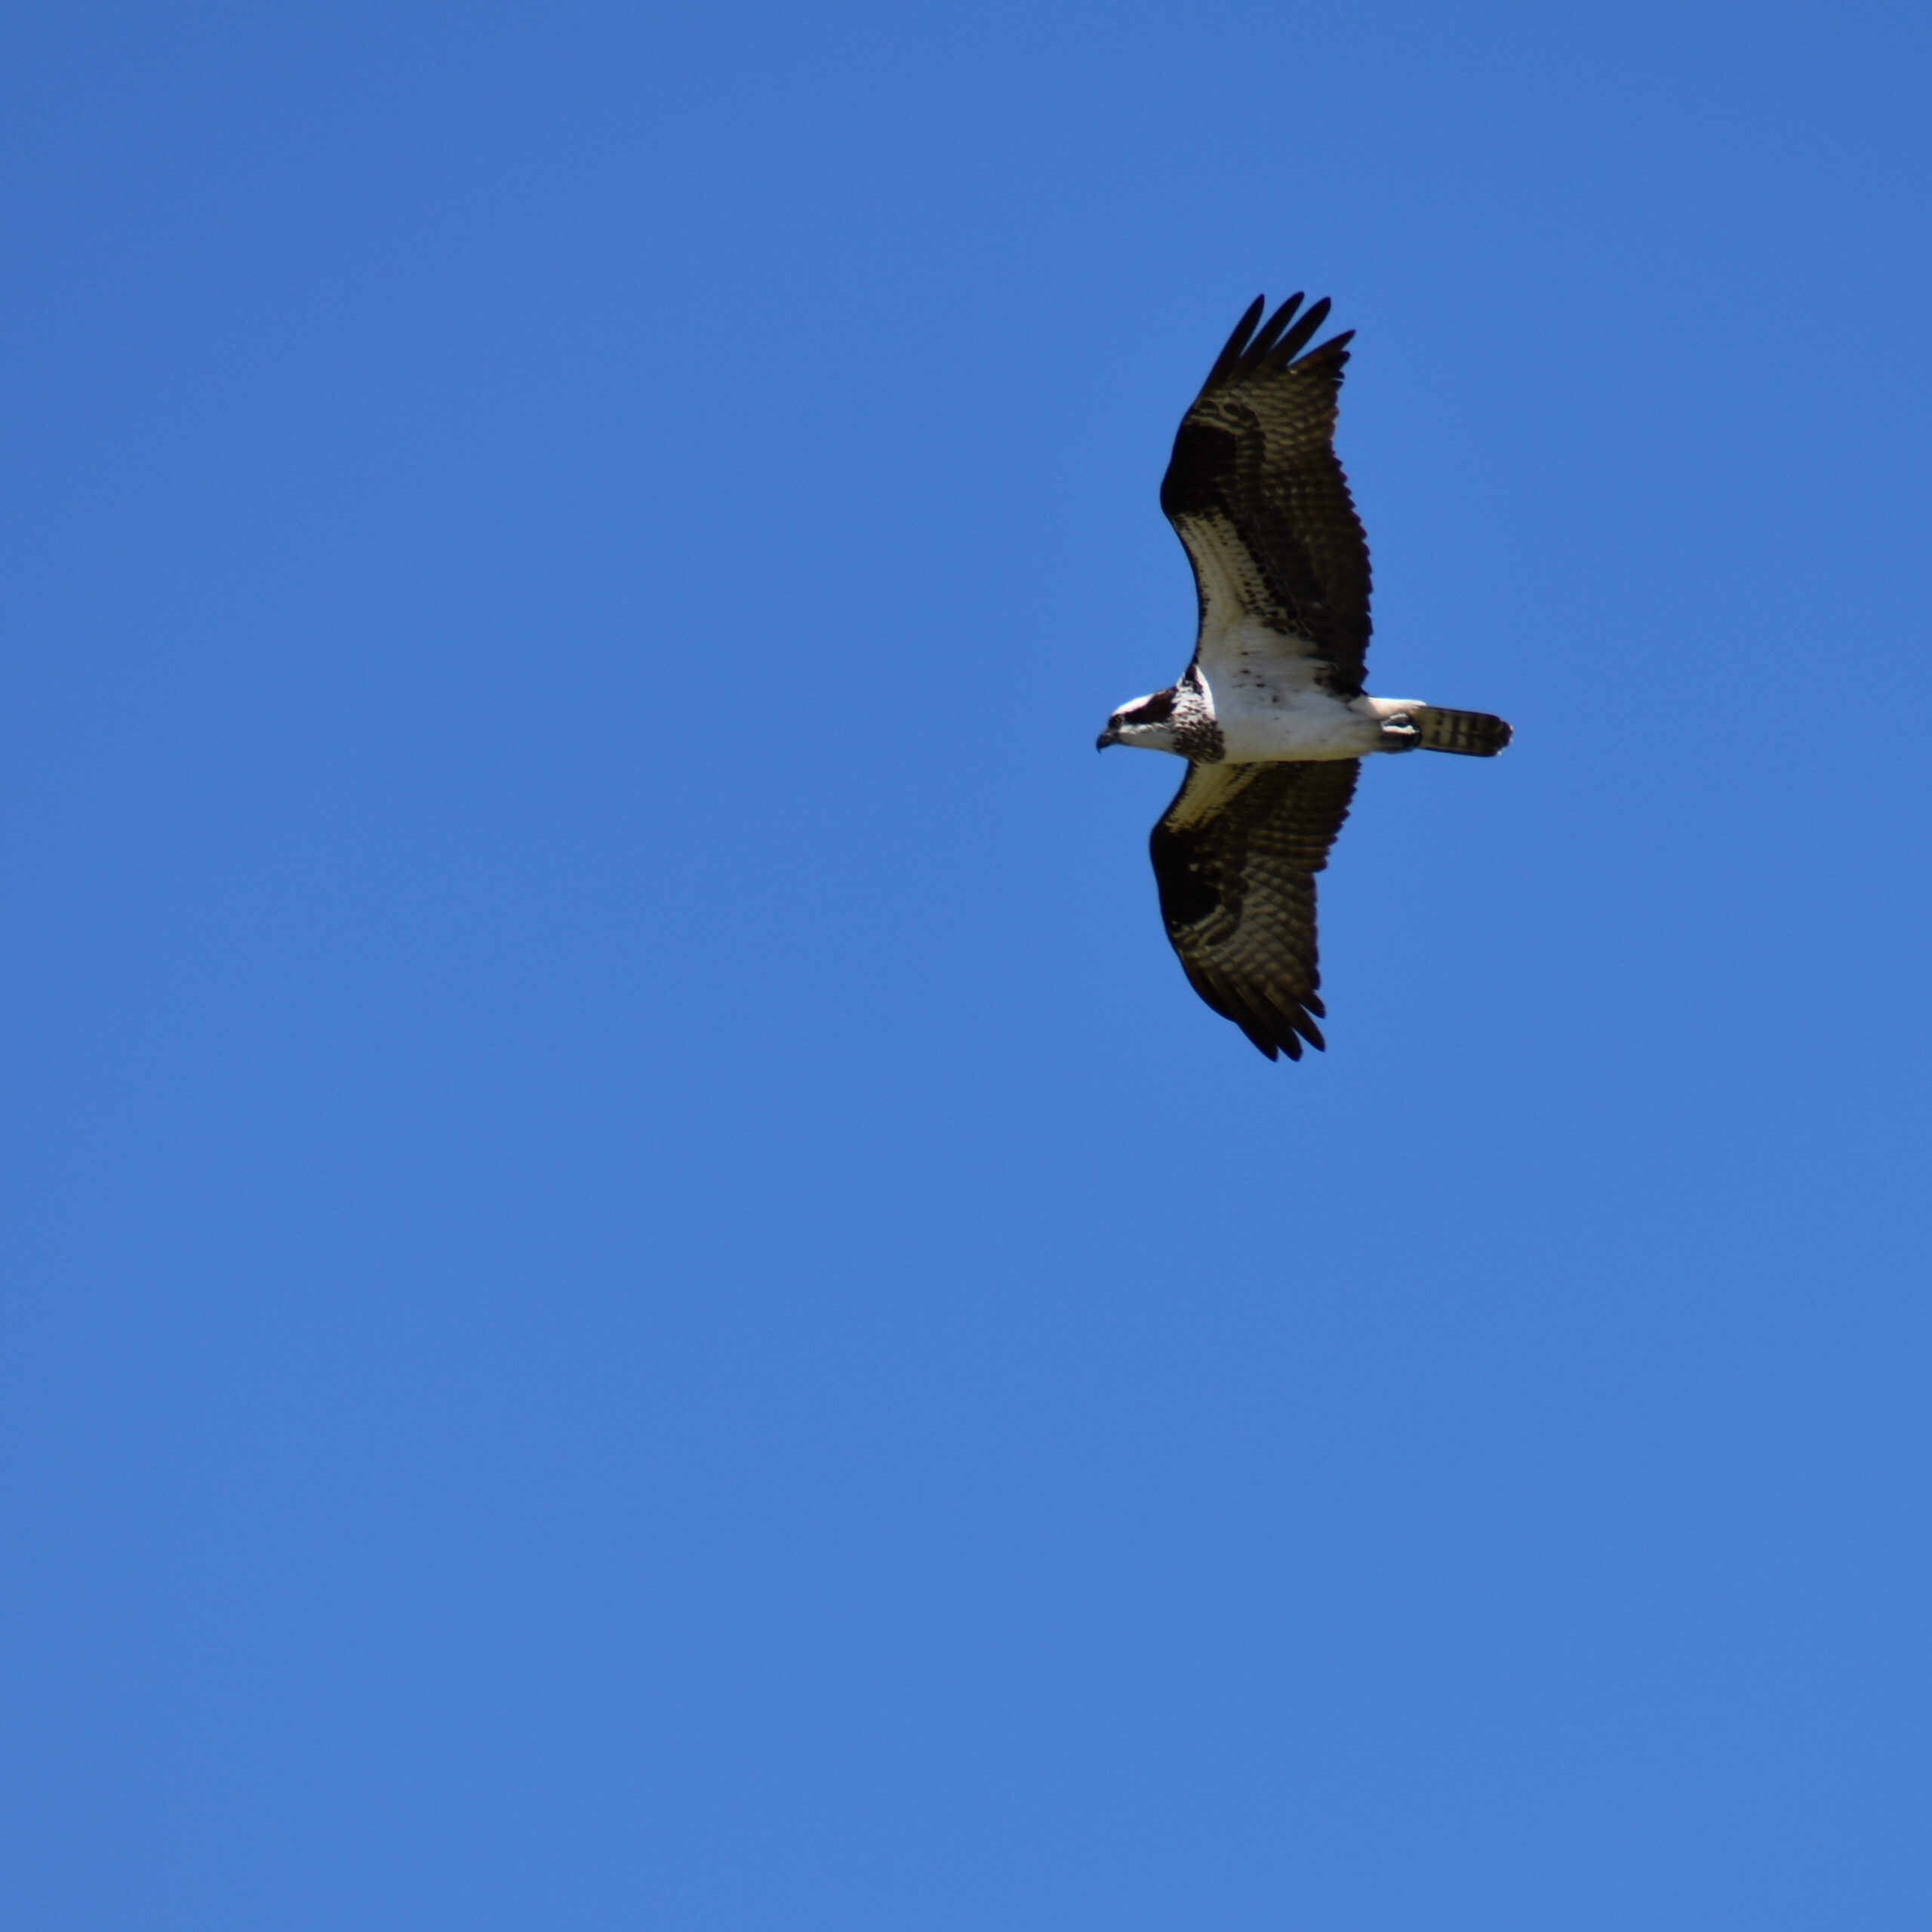 A large raptor soars with its wings spread wide against a deep blue sky. It has dark wings and a white body. Its tail is striped alternating dark and light colors. Its head is mostly white with a dark eye stripe and dark beak.